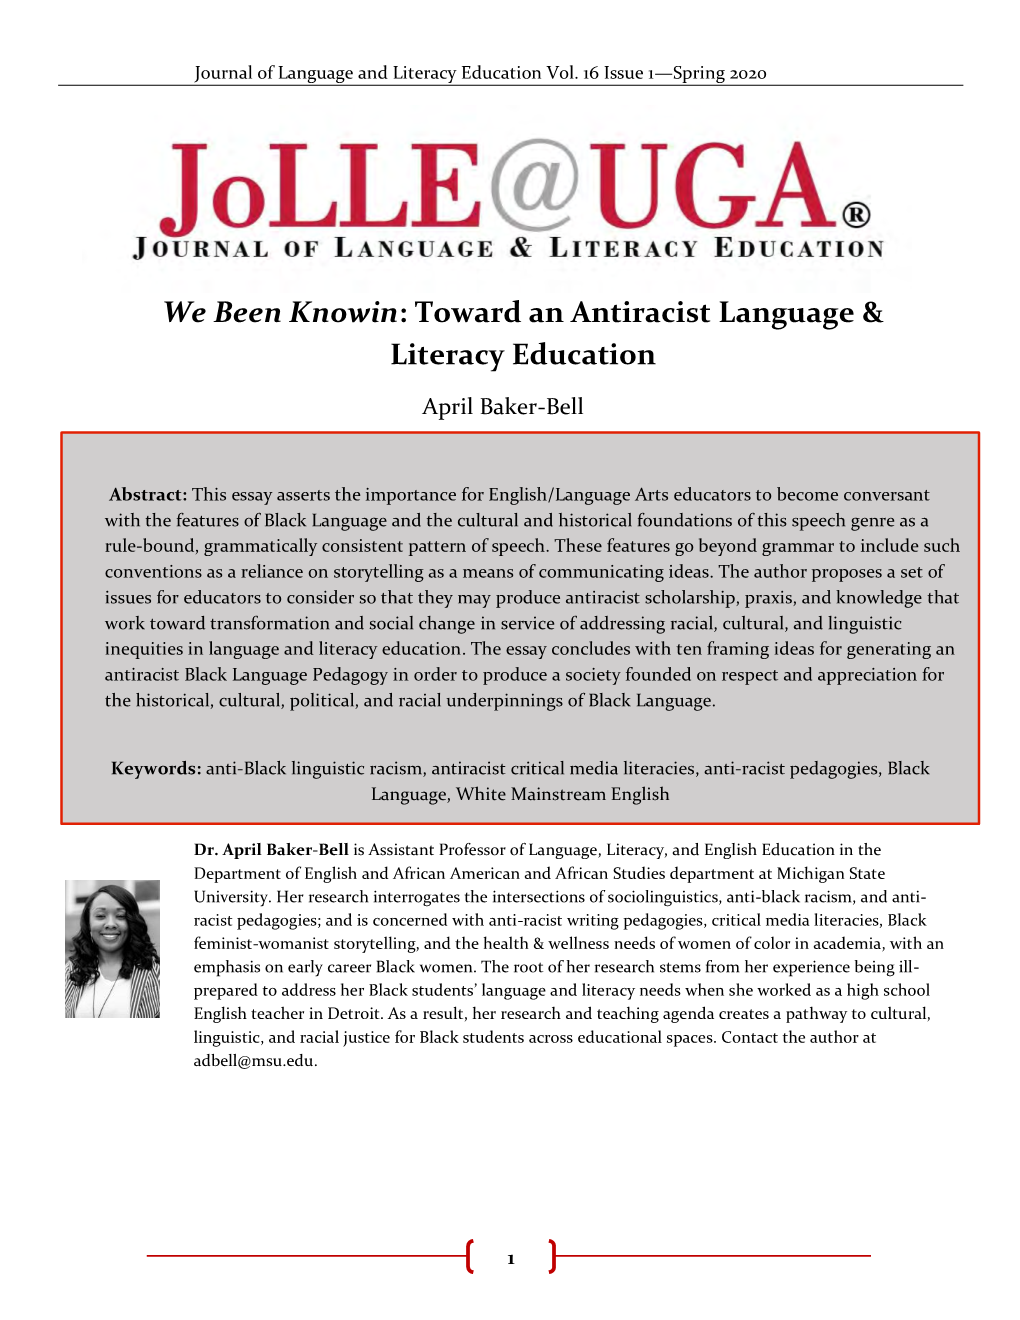 We Been Knowin: Toward an Antiracist Language & Literacy